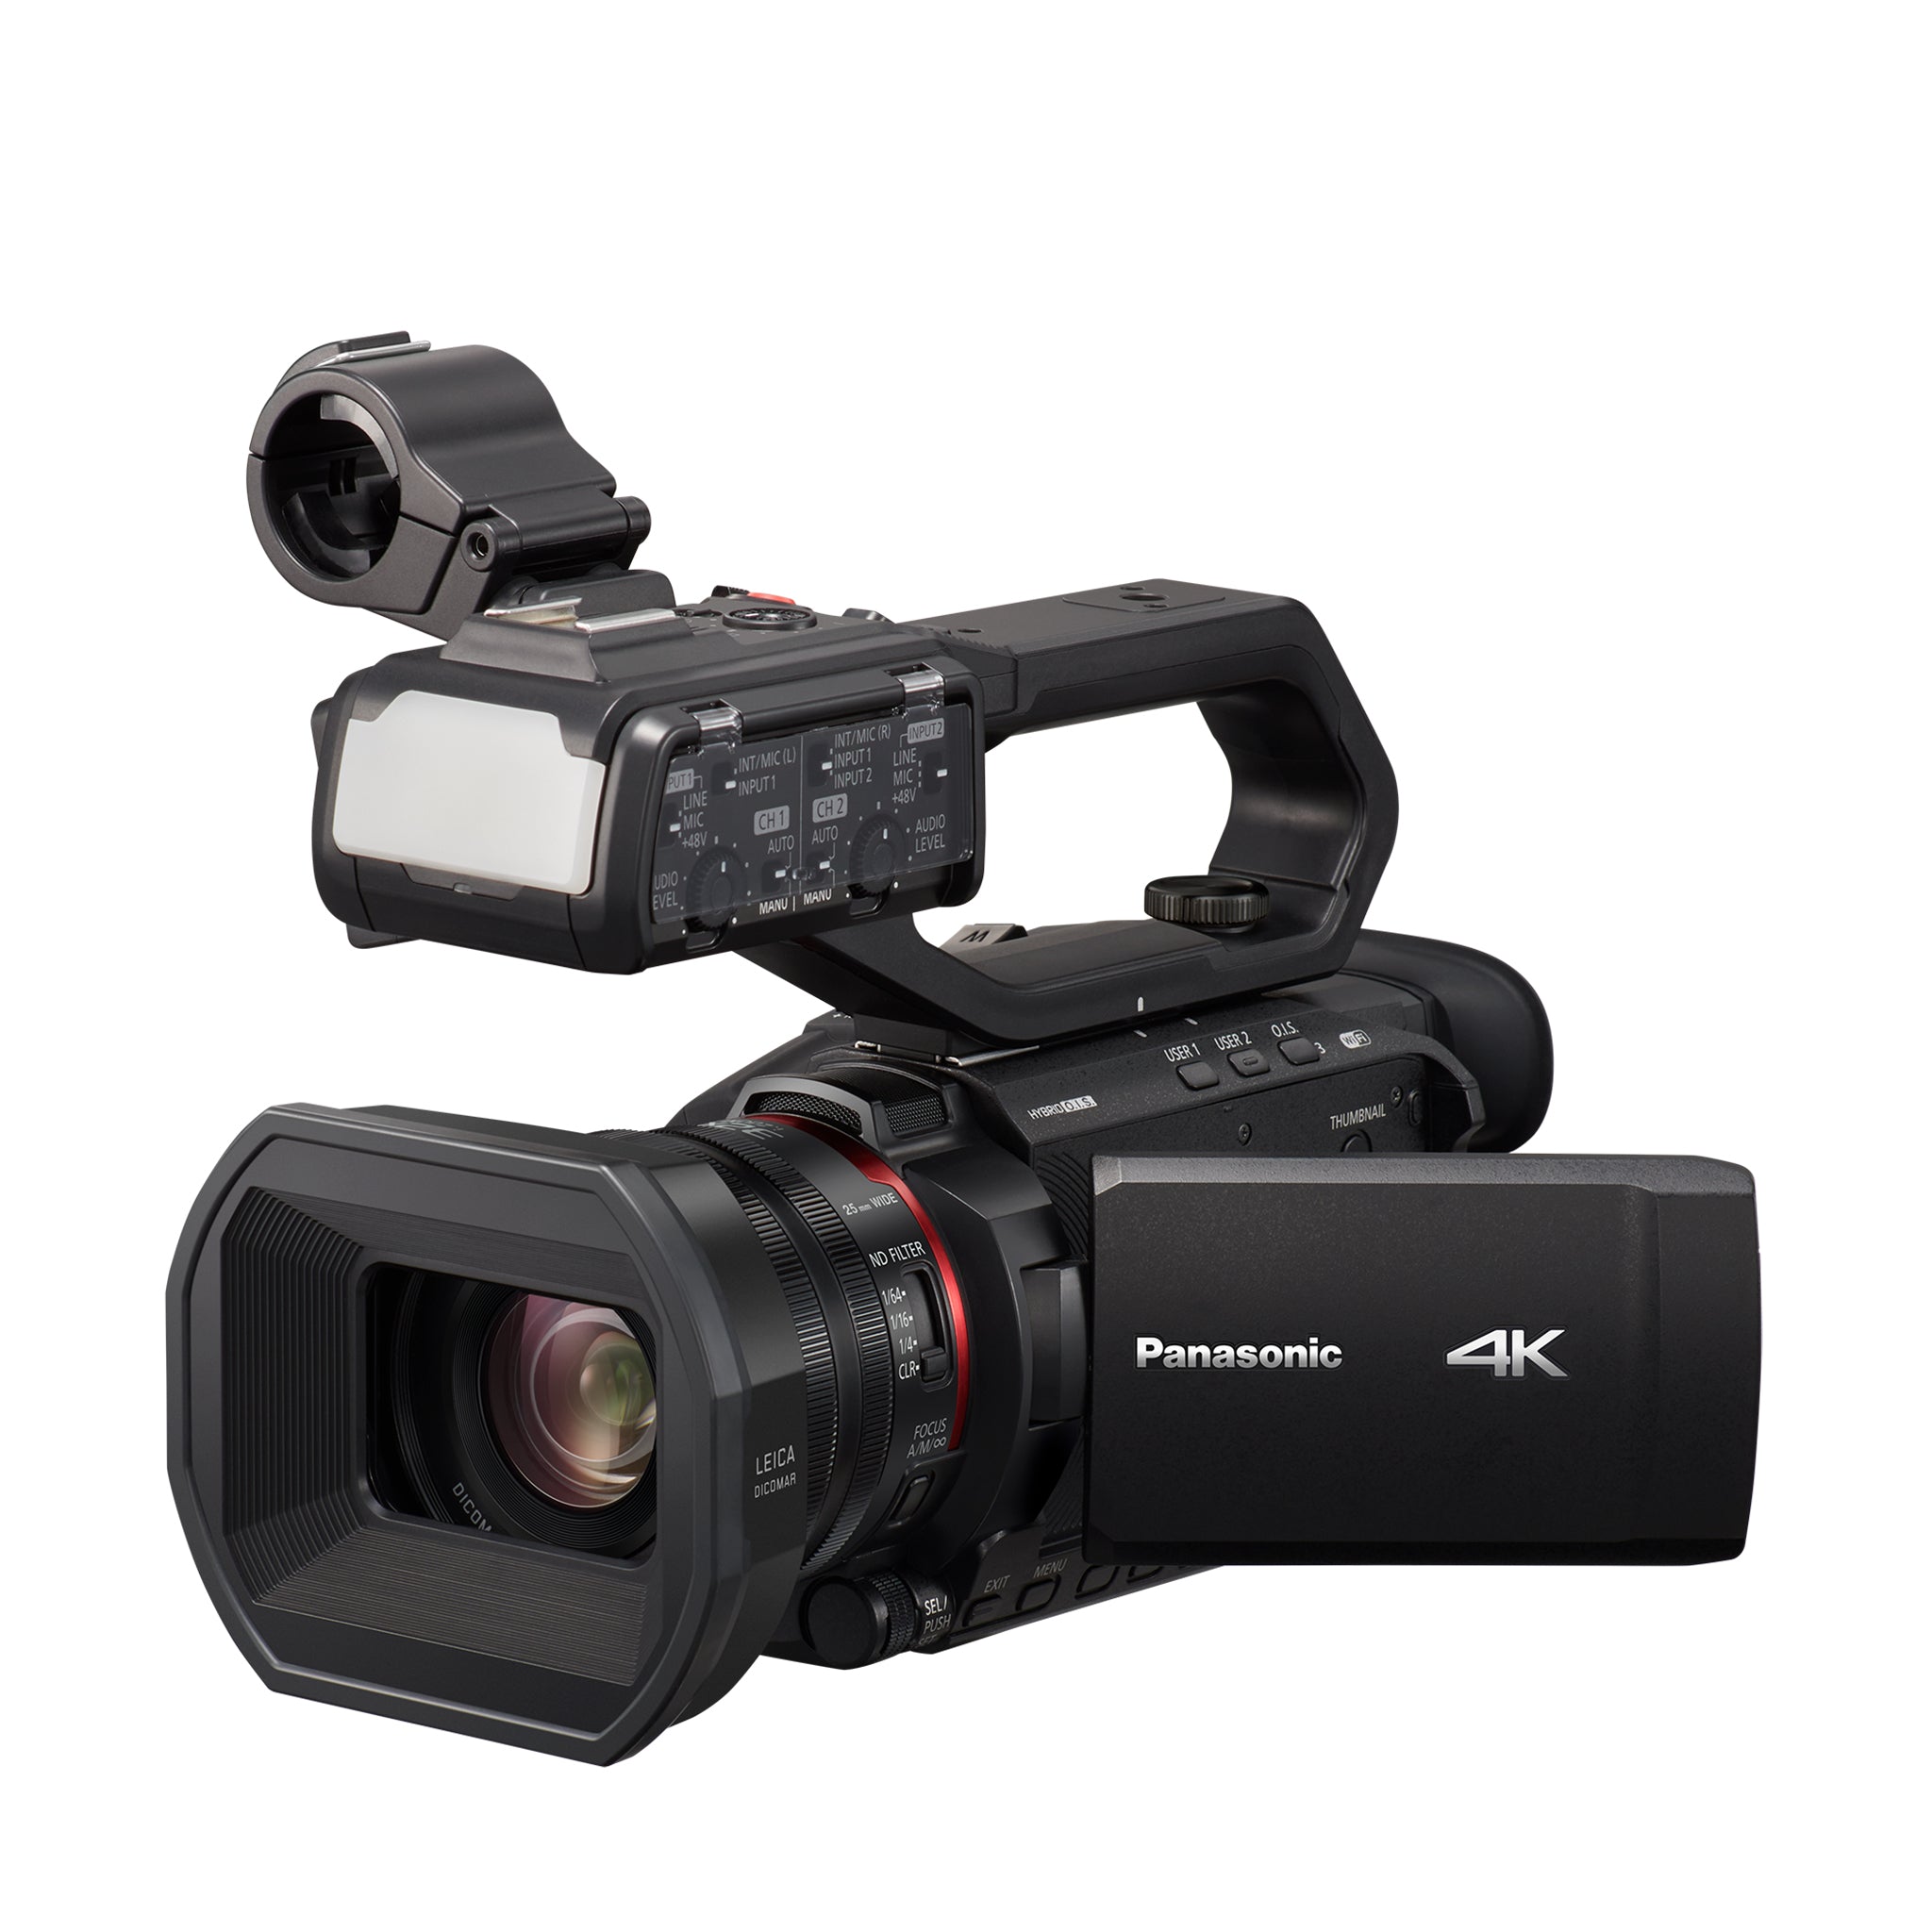 Panasonic 4K Professional Camcorder with 24X Optical Zoom and Live 